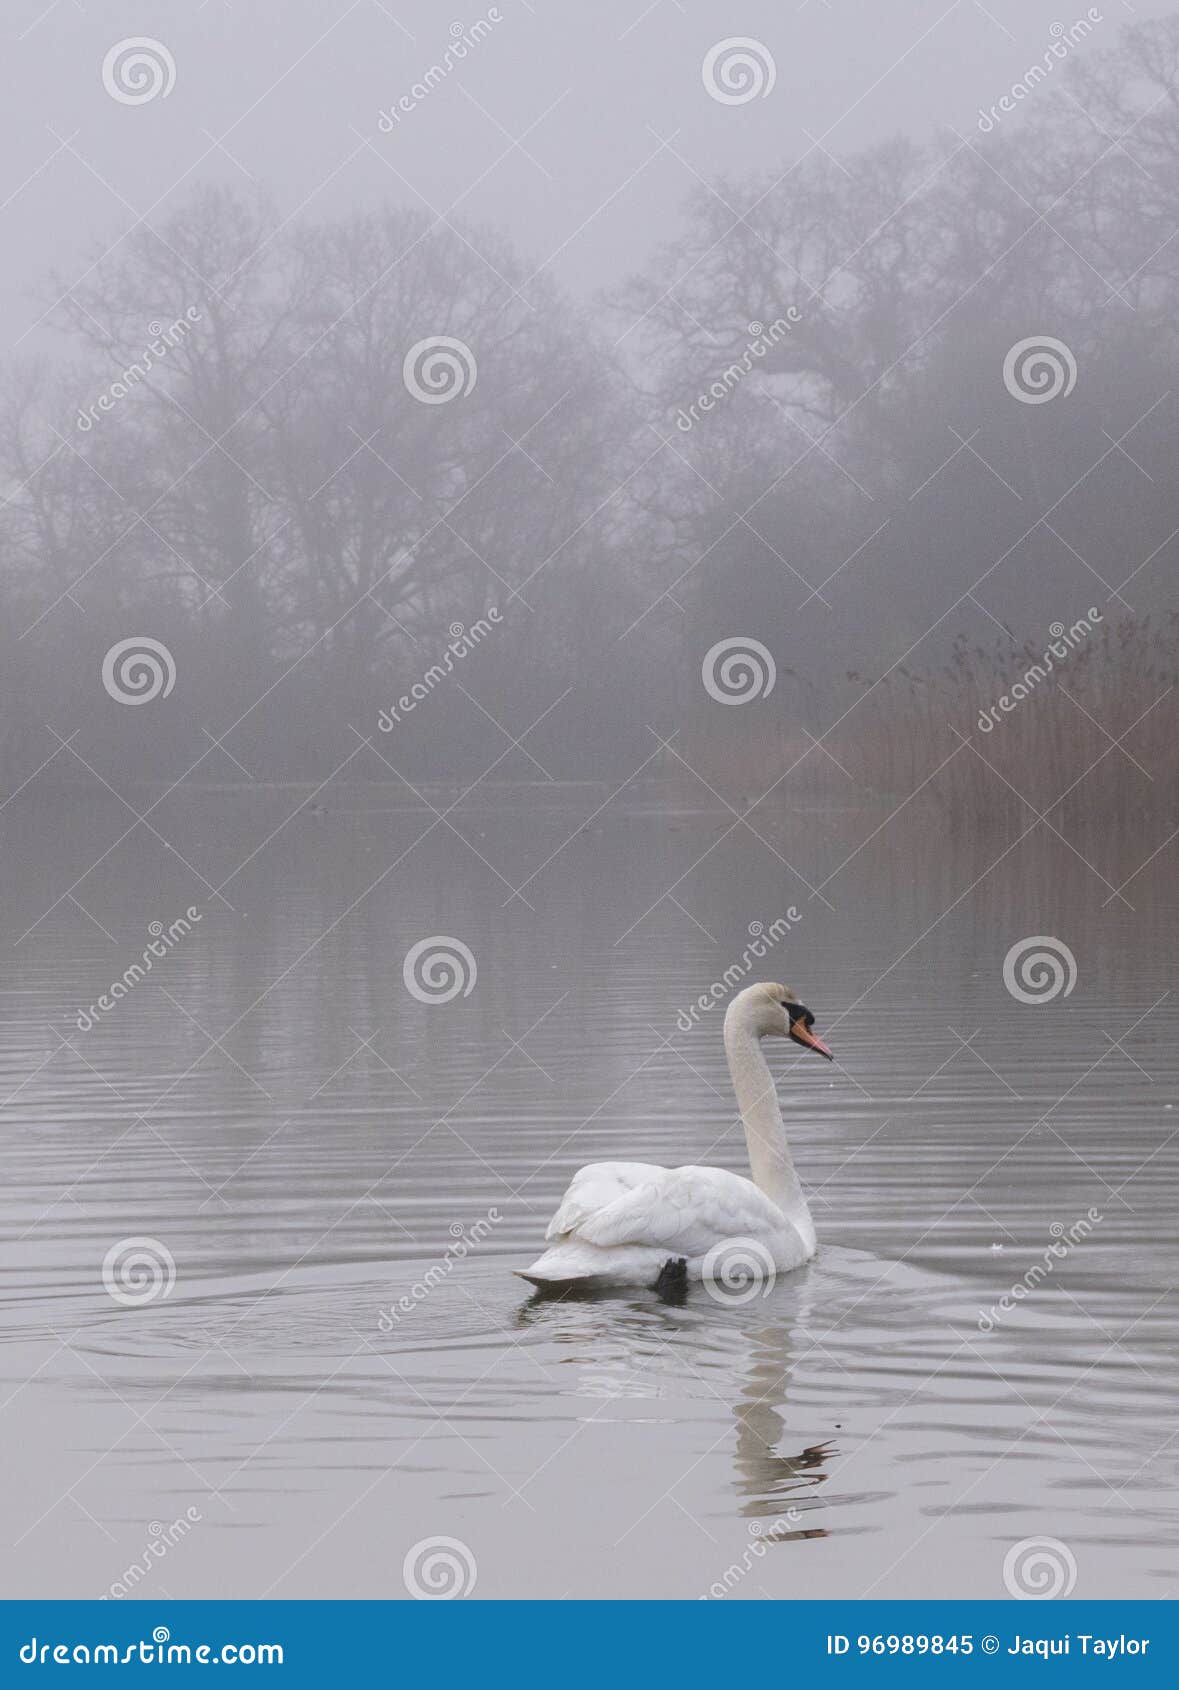 Swan in the Early Morning Mist Stock Image - Image of southampton, pond ...